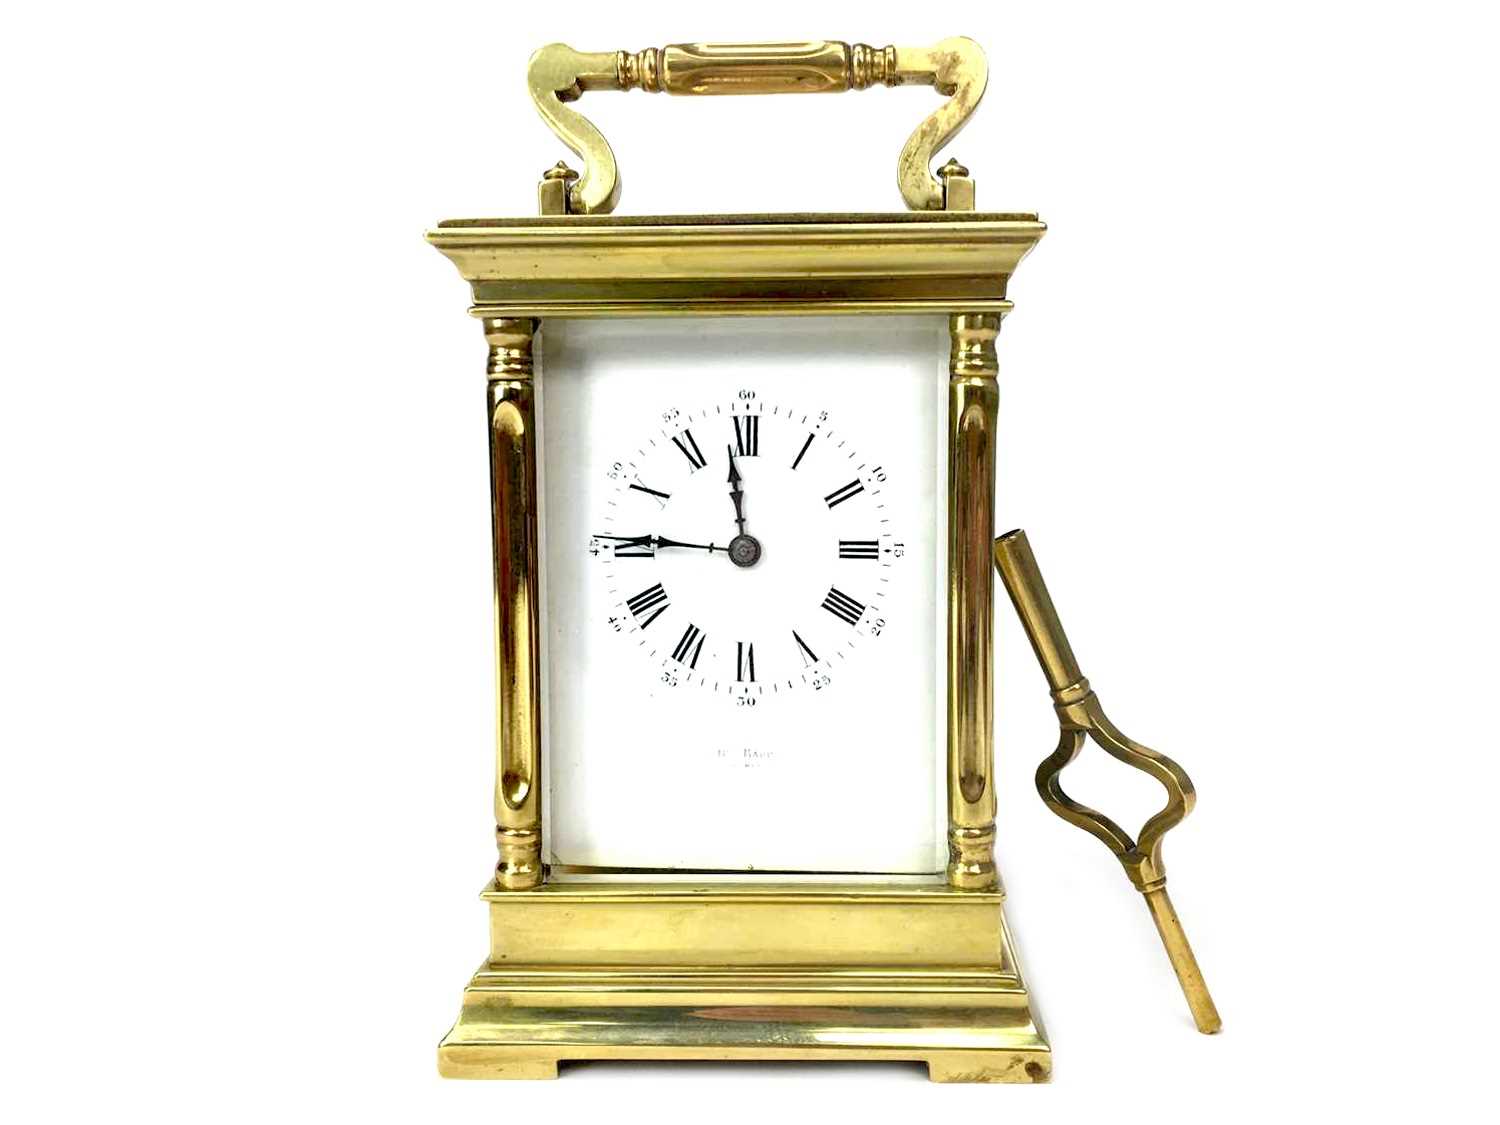 Lot 1116 - A LATE VICTORIAN FRENCH CARRIAGE CLOCK BY HENRY MARC